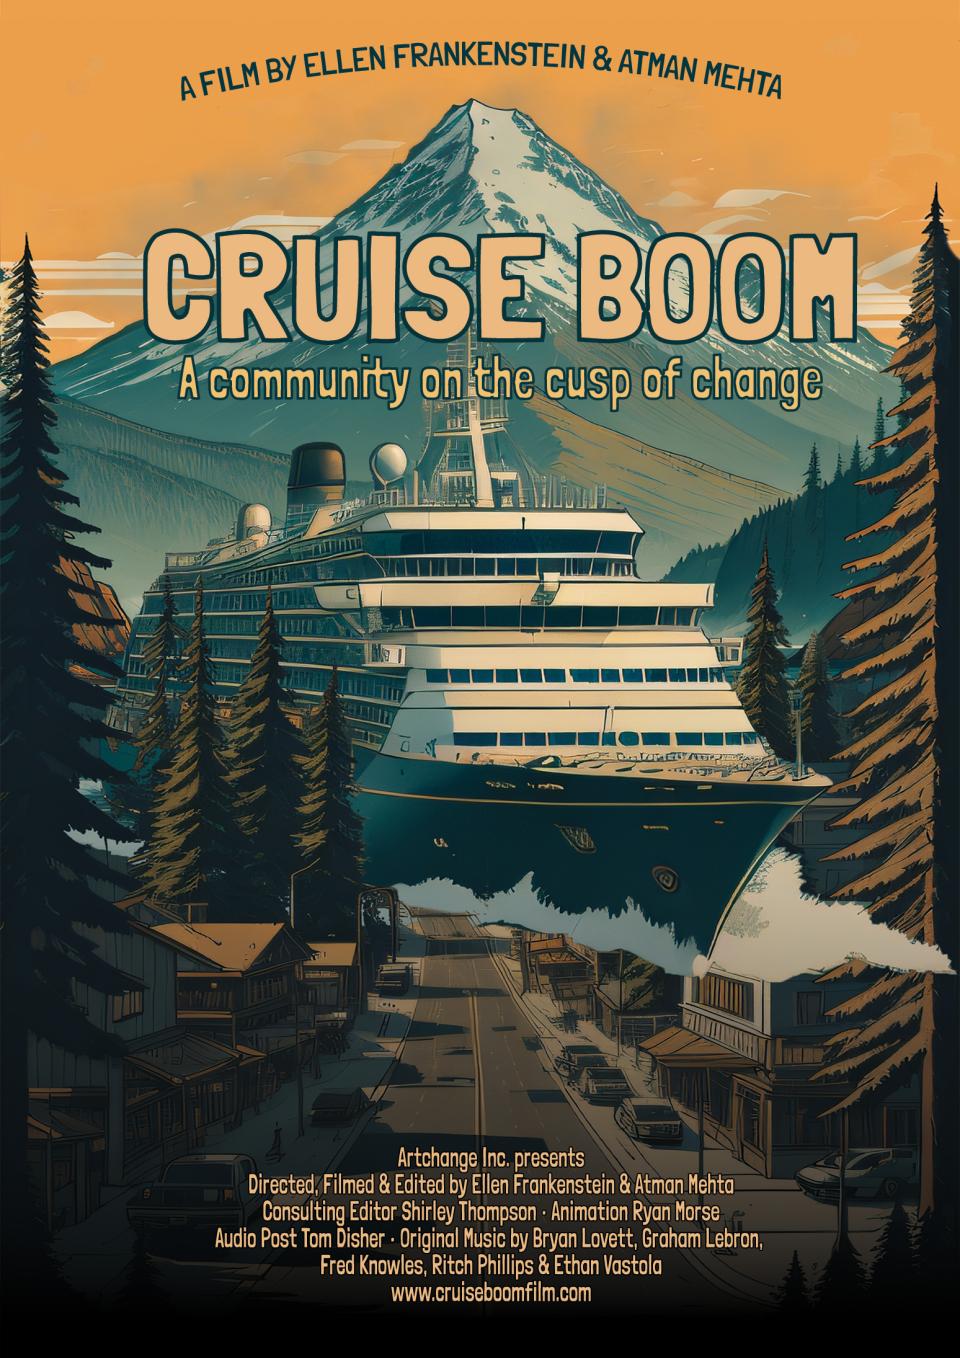 Cruise Boom poster: The Alaskan wild is beautifully painted and a cruise ship sails right through the middle of the poster. 